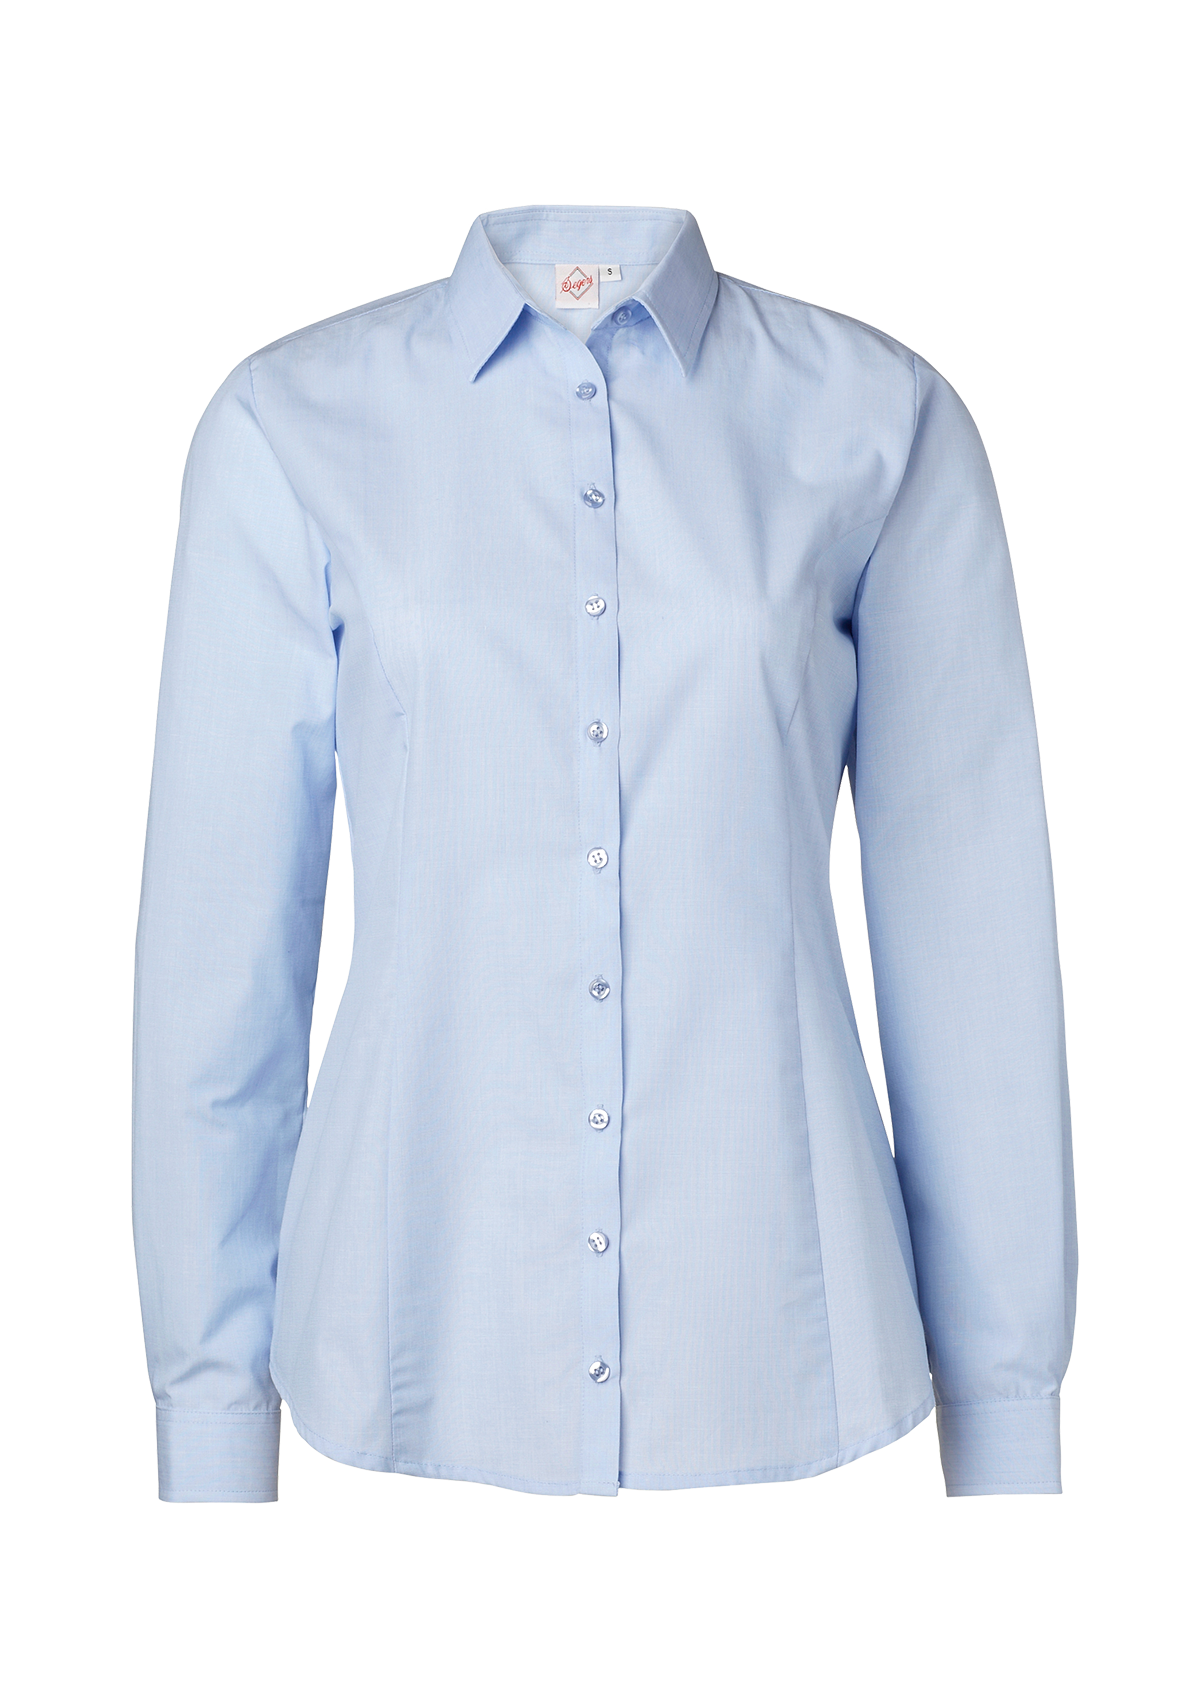 Women's shirt with long sleeves. Segers | Cookniche